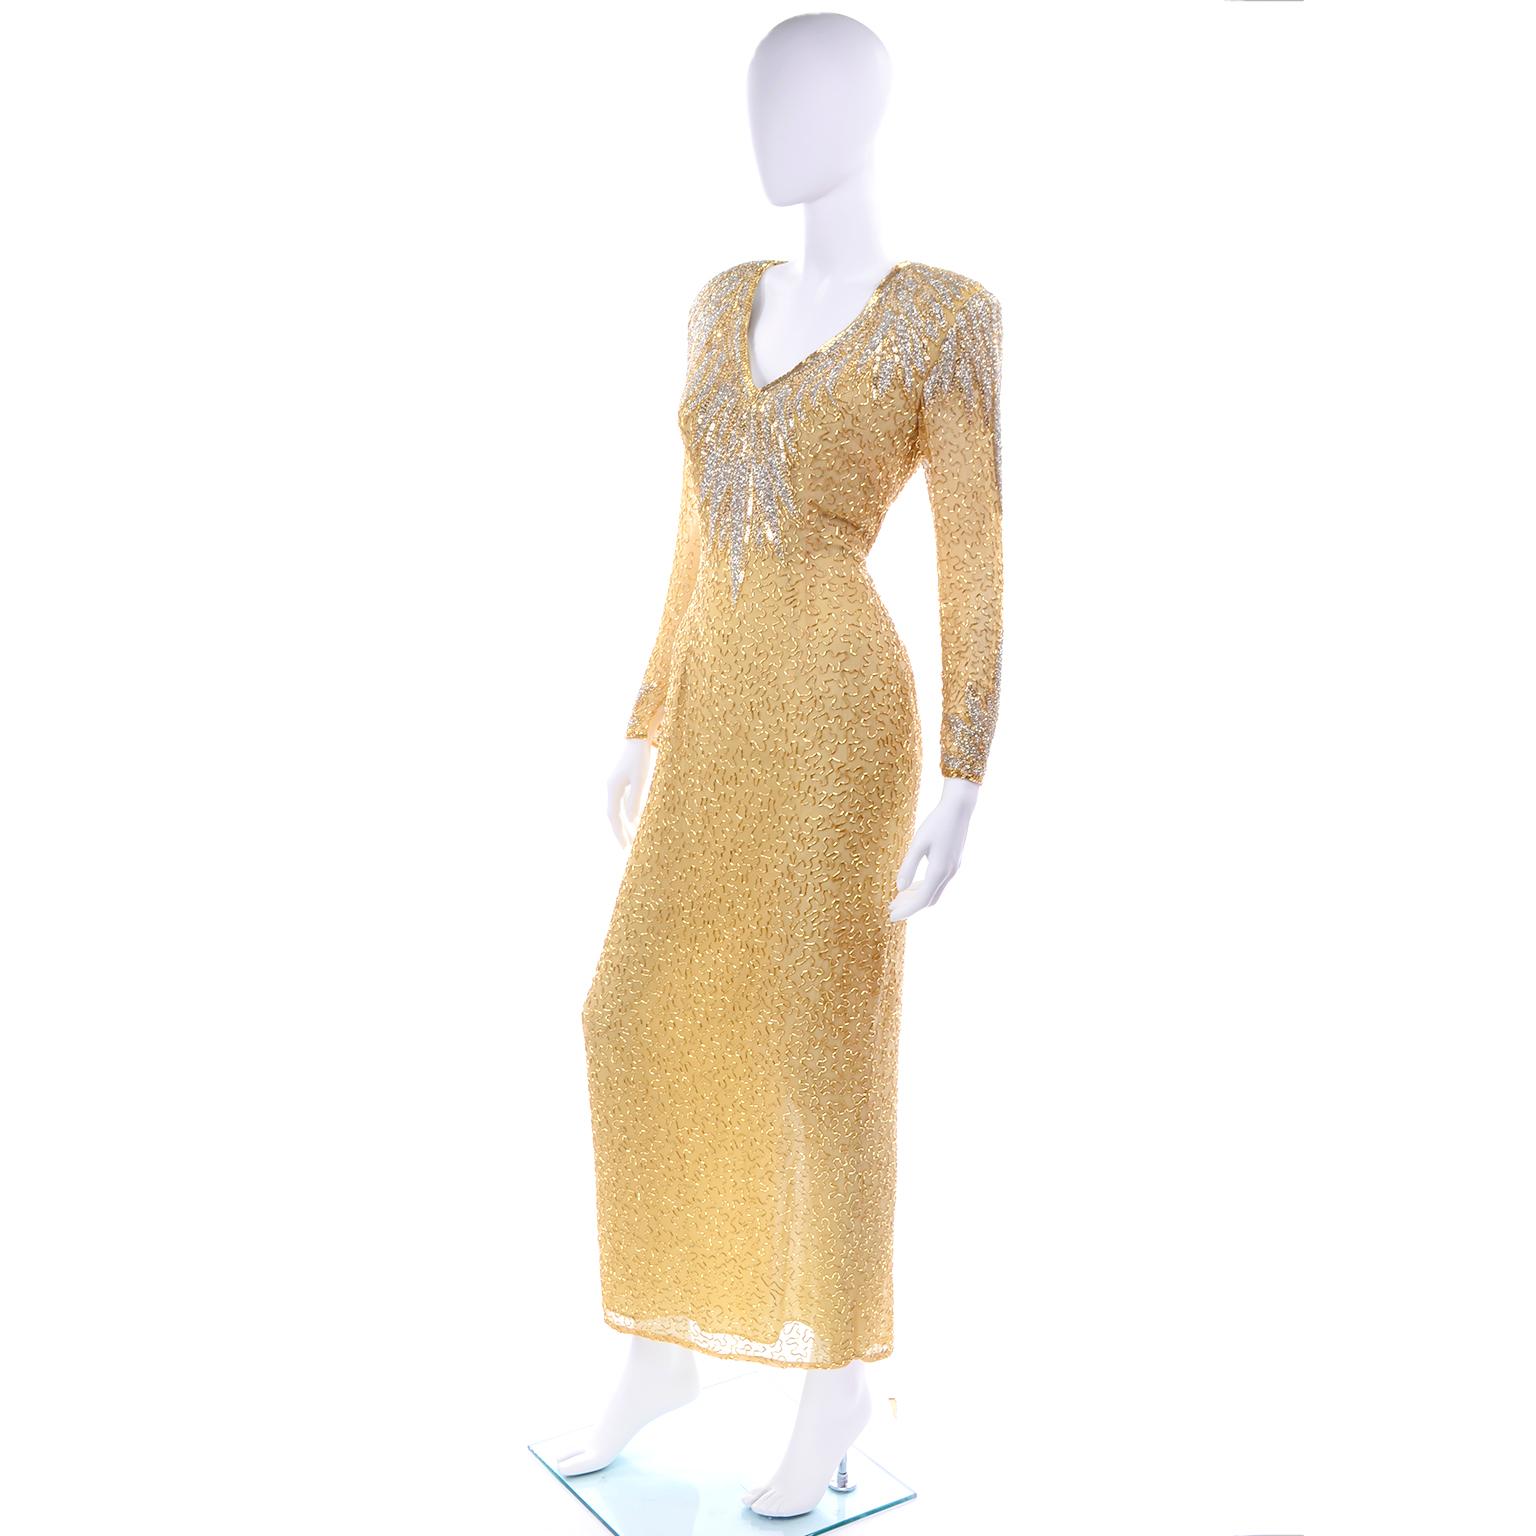 This is a stunning vintage gold silk beaded Black Tie evening dress from the 1980's.  This incredible long dress is covered in silver and gold bugle beads and is so beautiful in person! There are shoulder pads for structure, a slit up the back and a